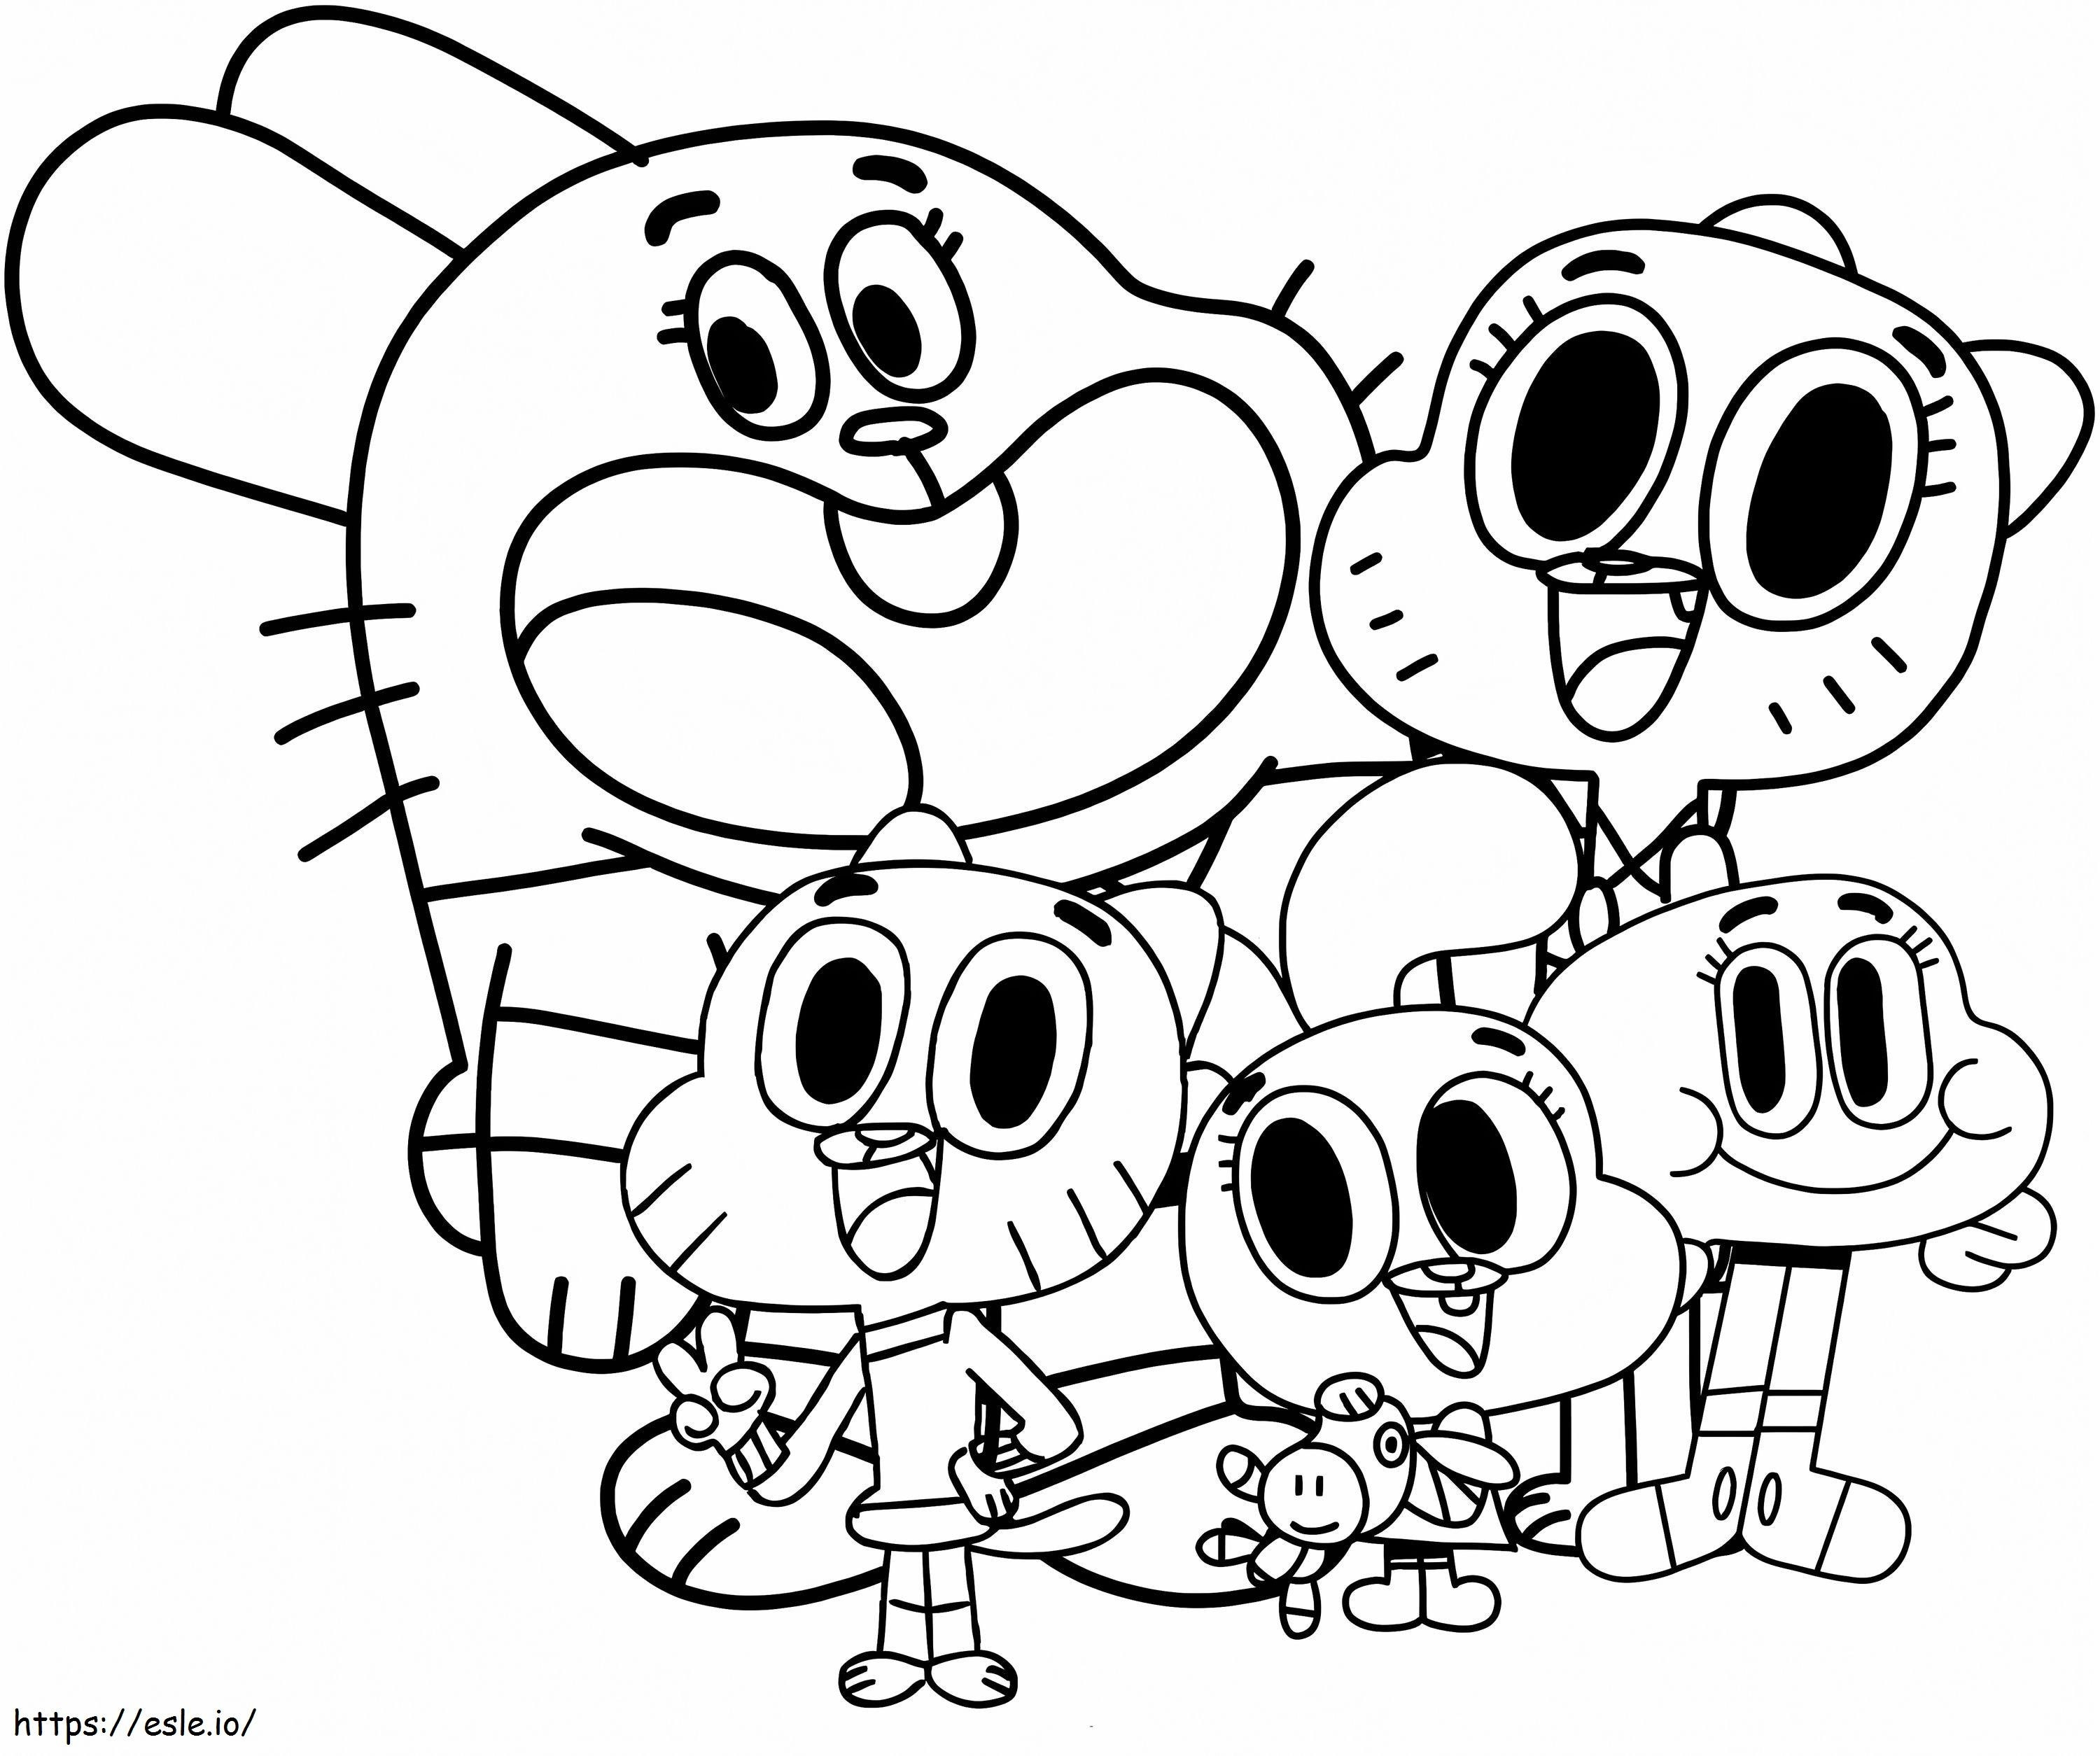 Darwin And Family coloring page